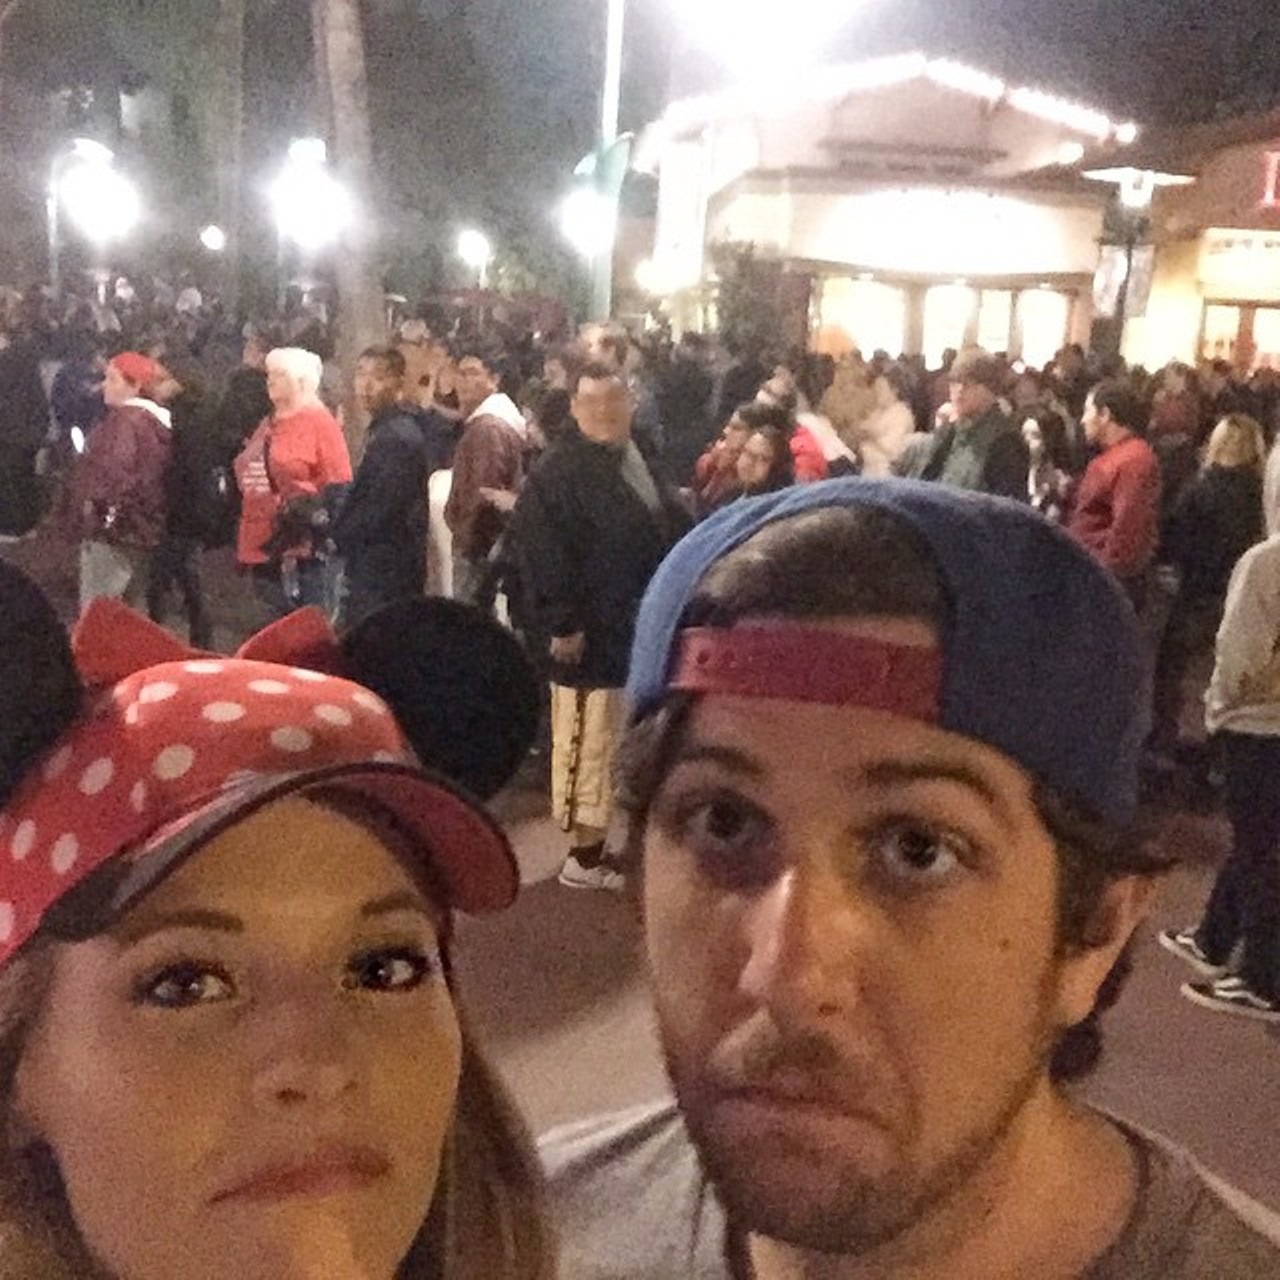 Theme parks become so crowded they are barely functional 
Photo via katieleclerc/Instagram